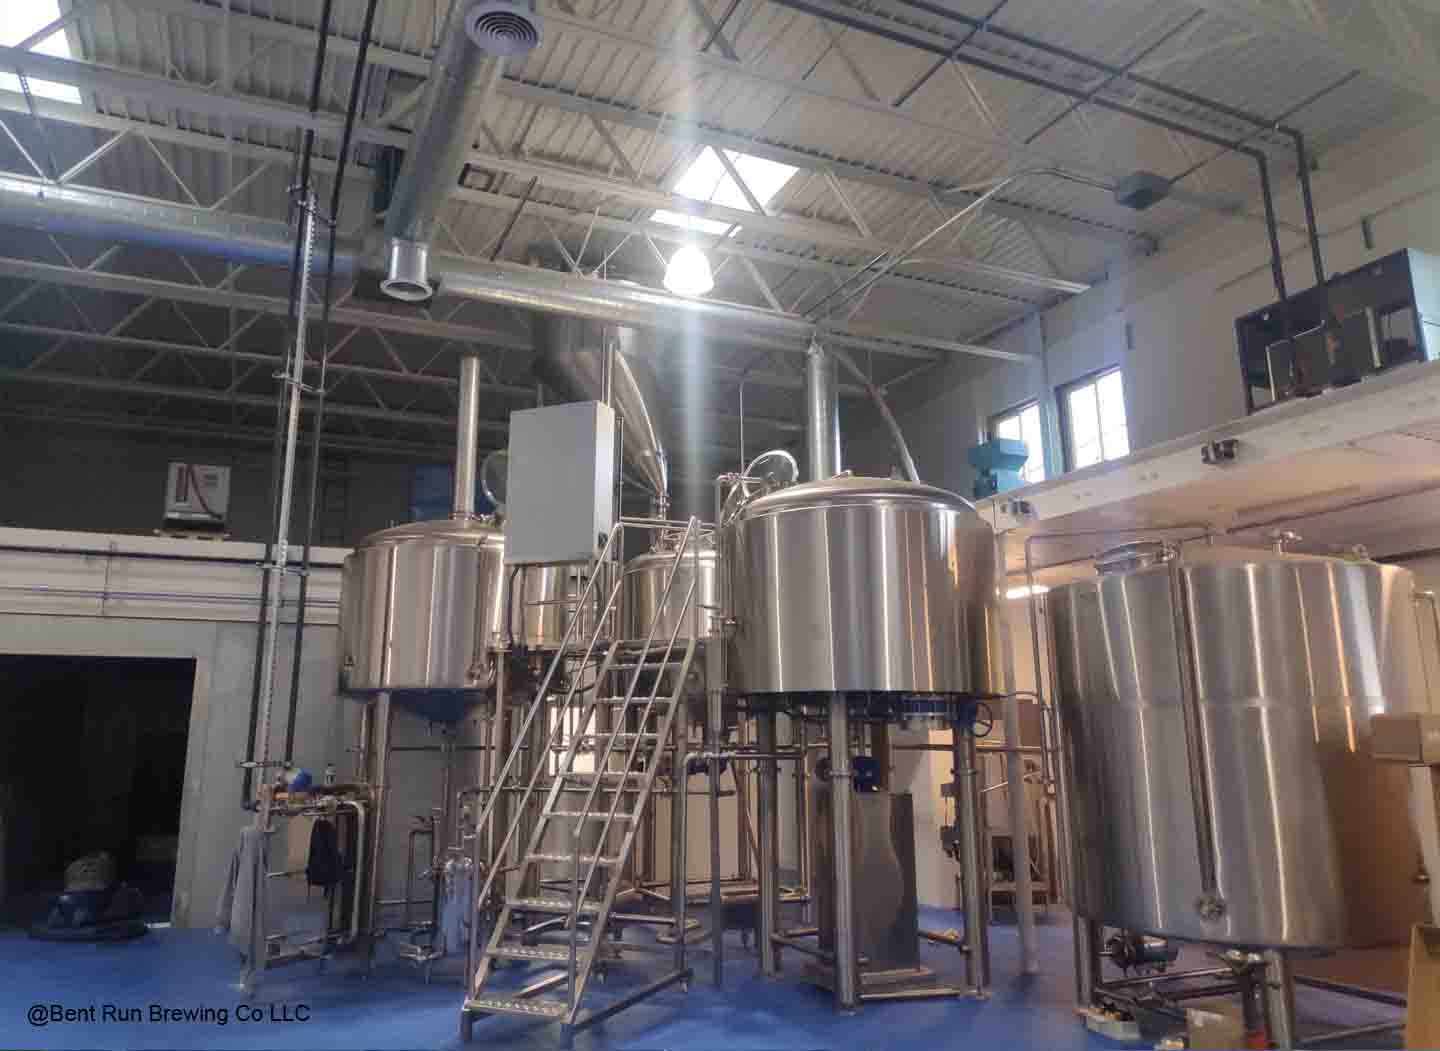 2000L brewhouse,2000L fermenter,Australia brewery equipment,4000liter fermenter, how to start a microbrewery business,starting a beer brewing business,microbrewery equipment 